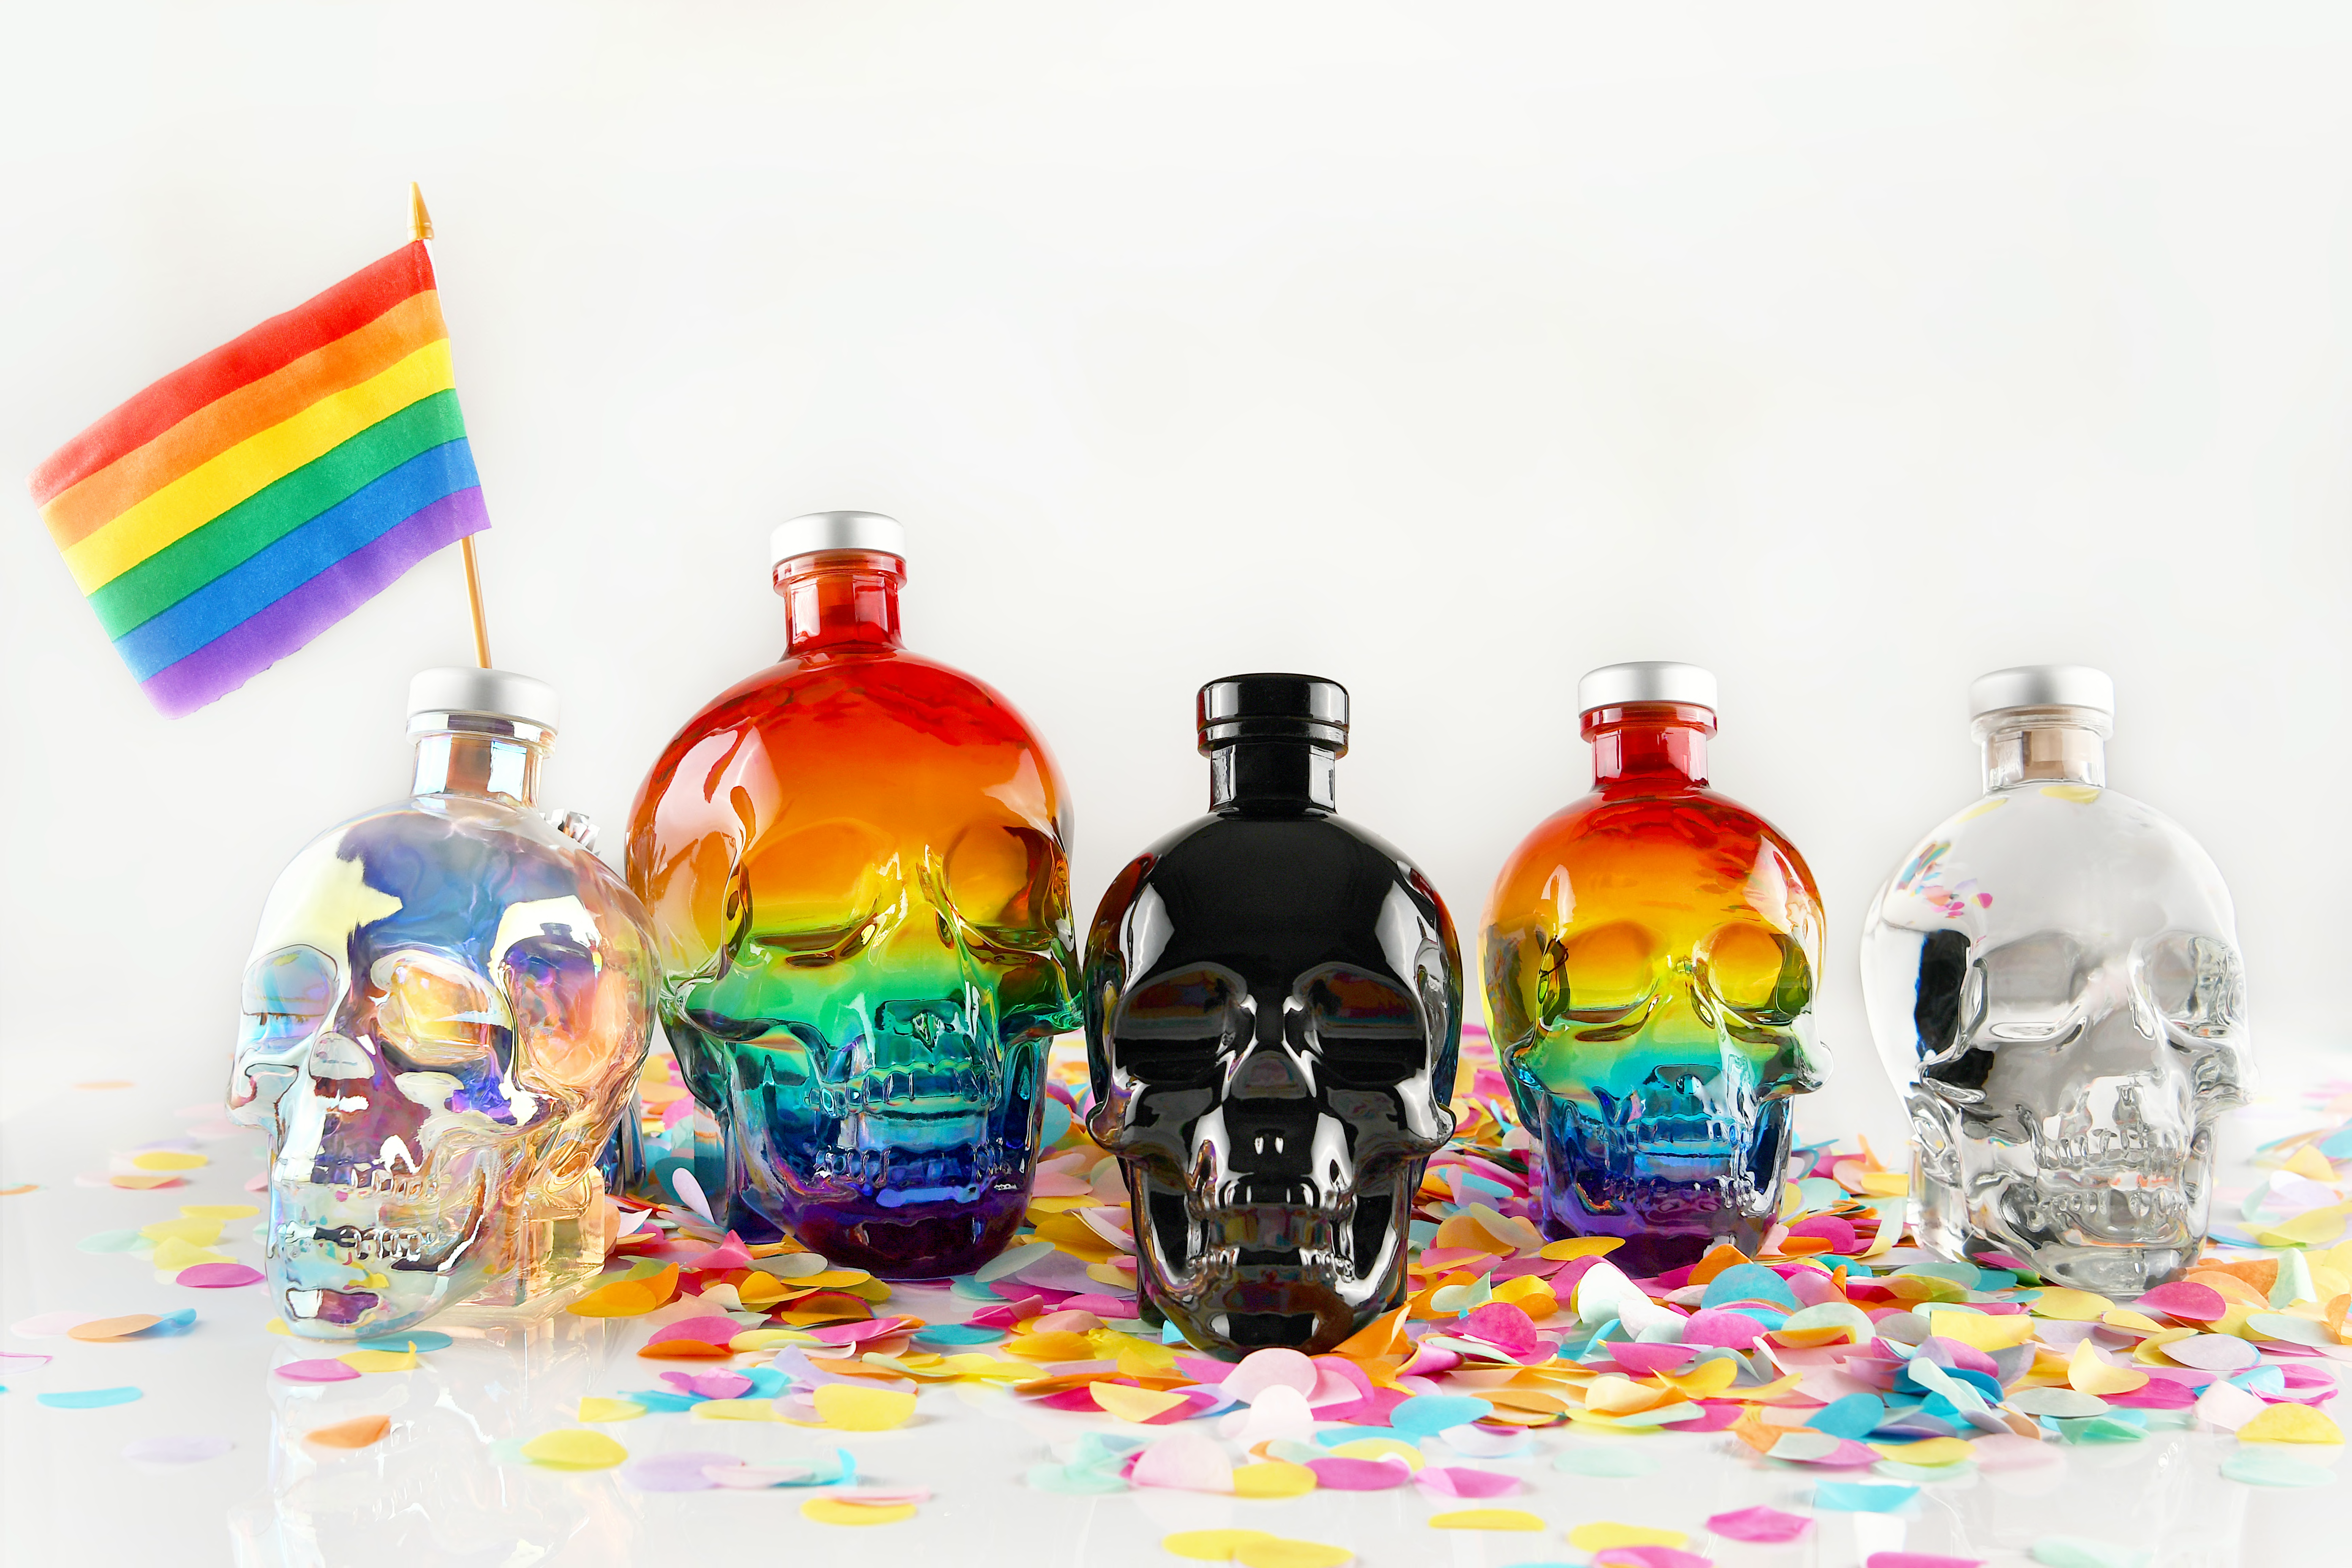 Crystal Head Vodka celebrates Pride with a limited edition rainbow bottle